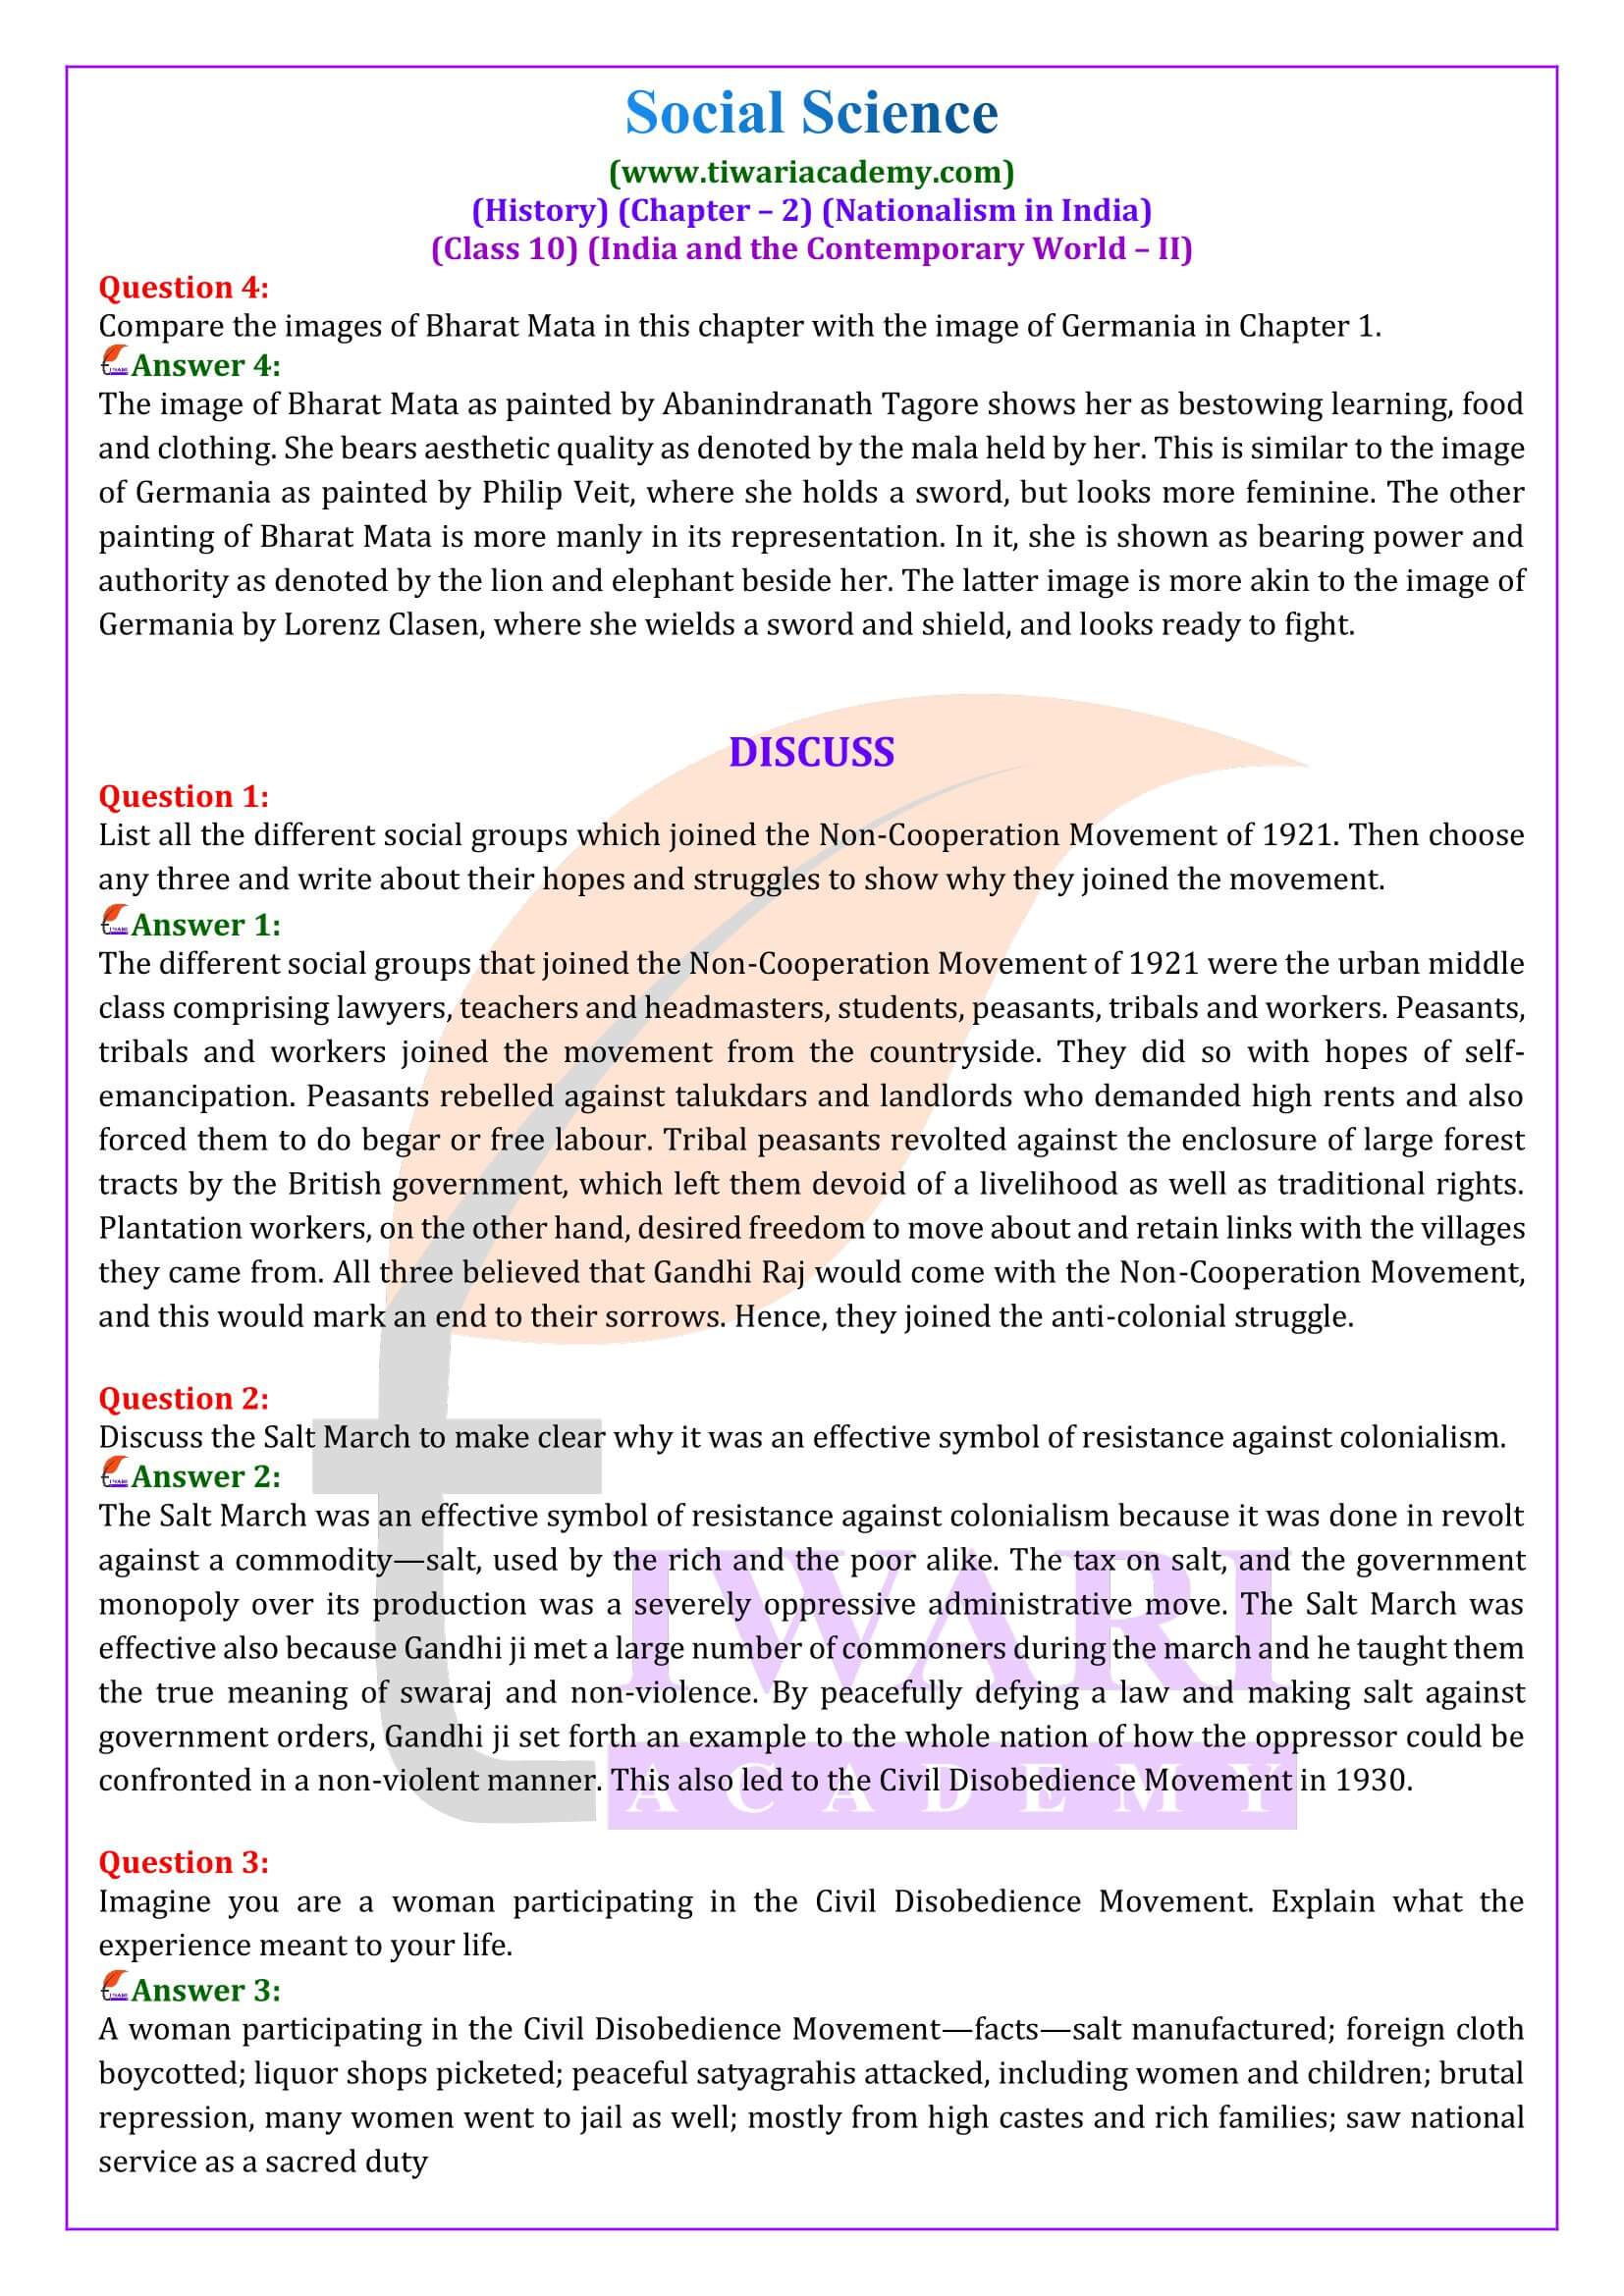 Class 10 History Chapter 2